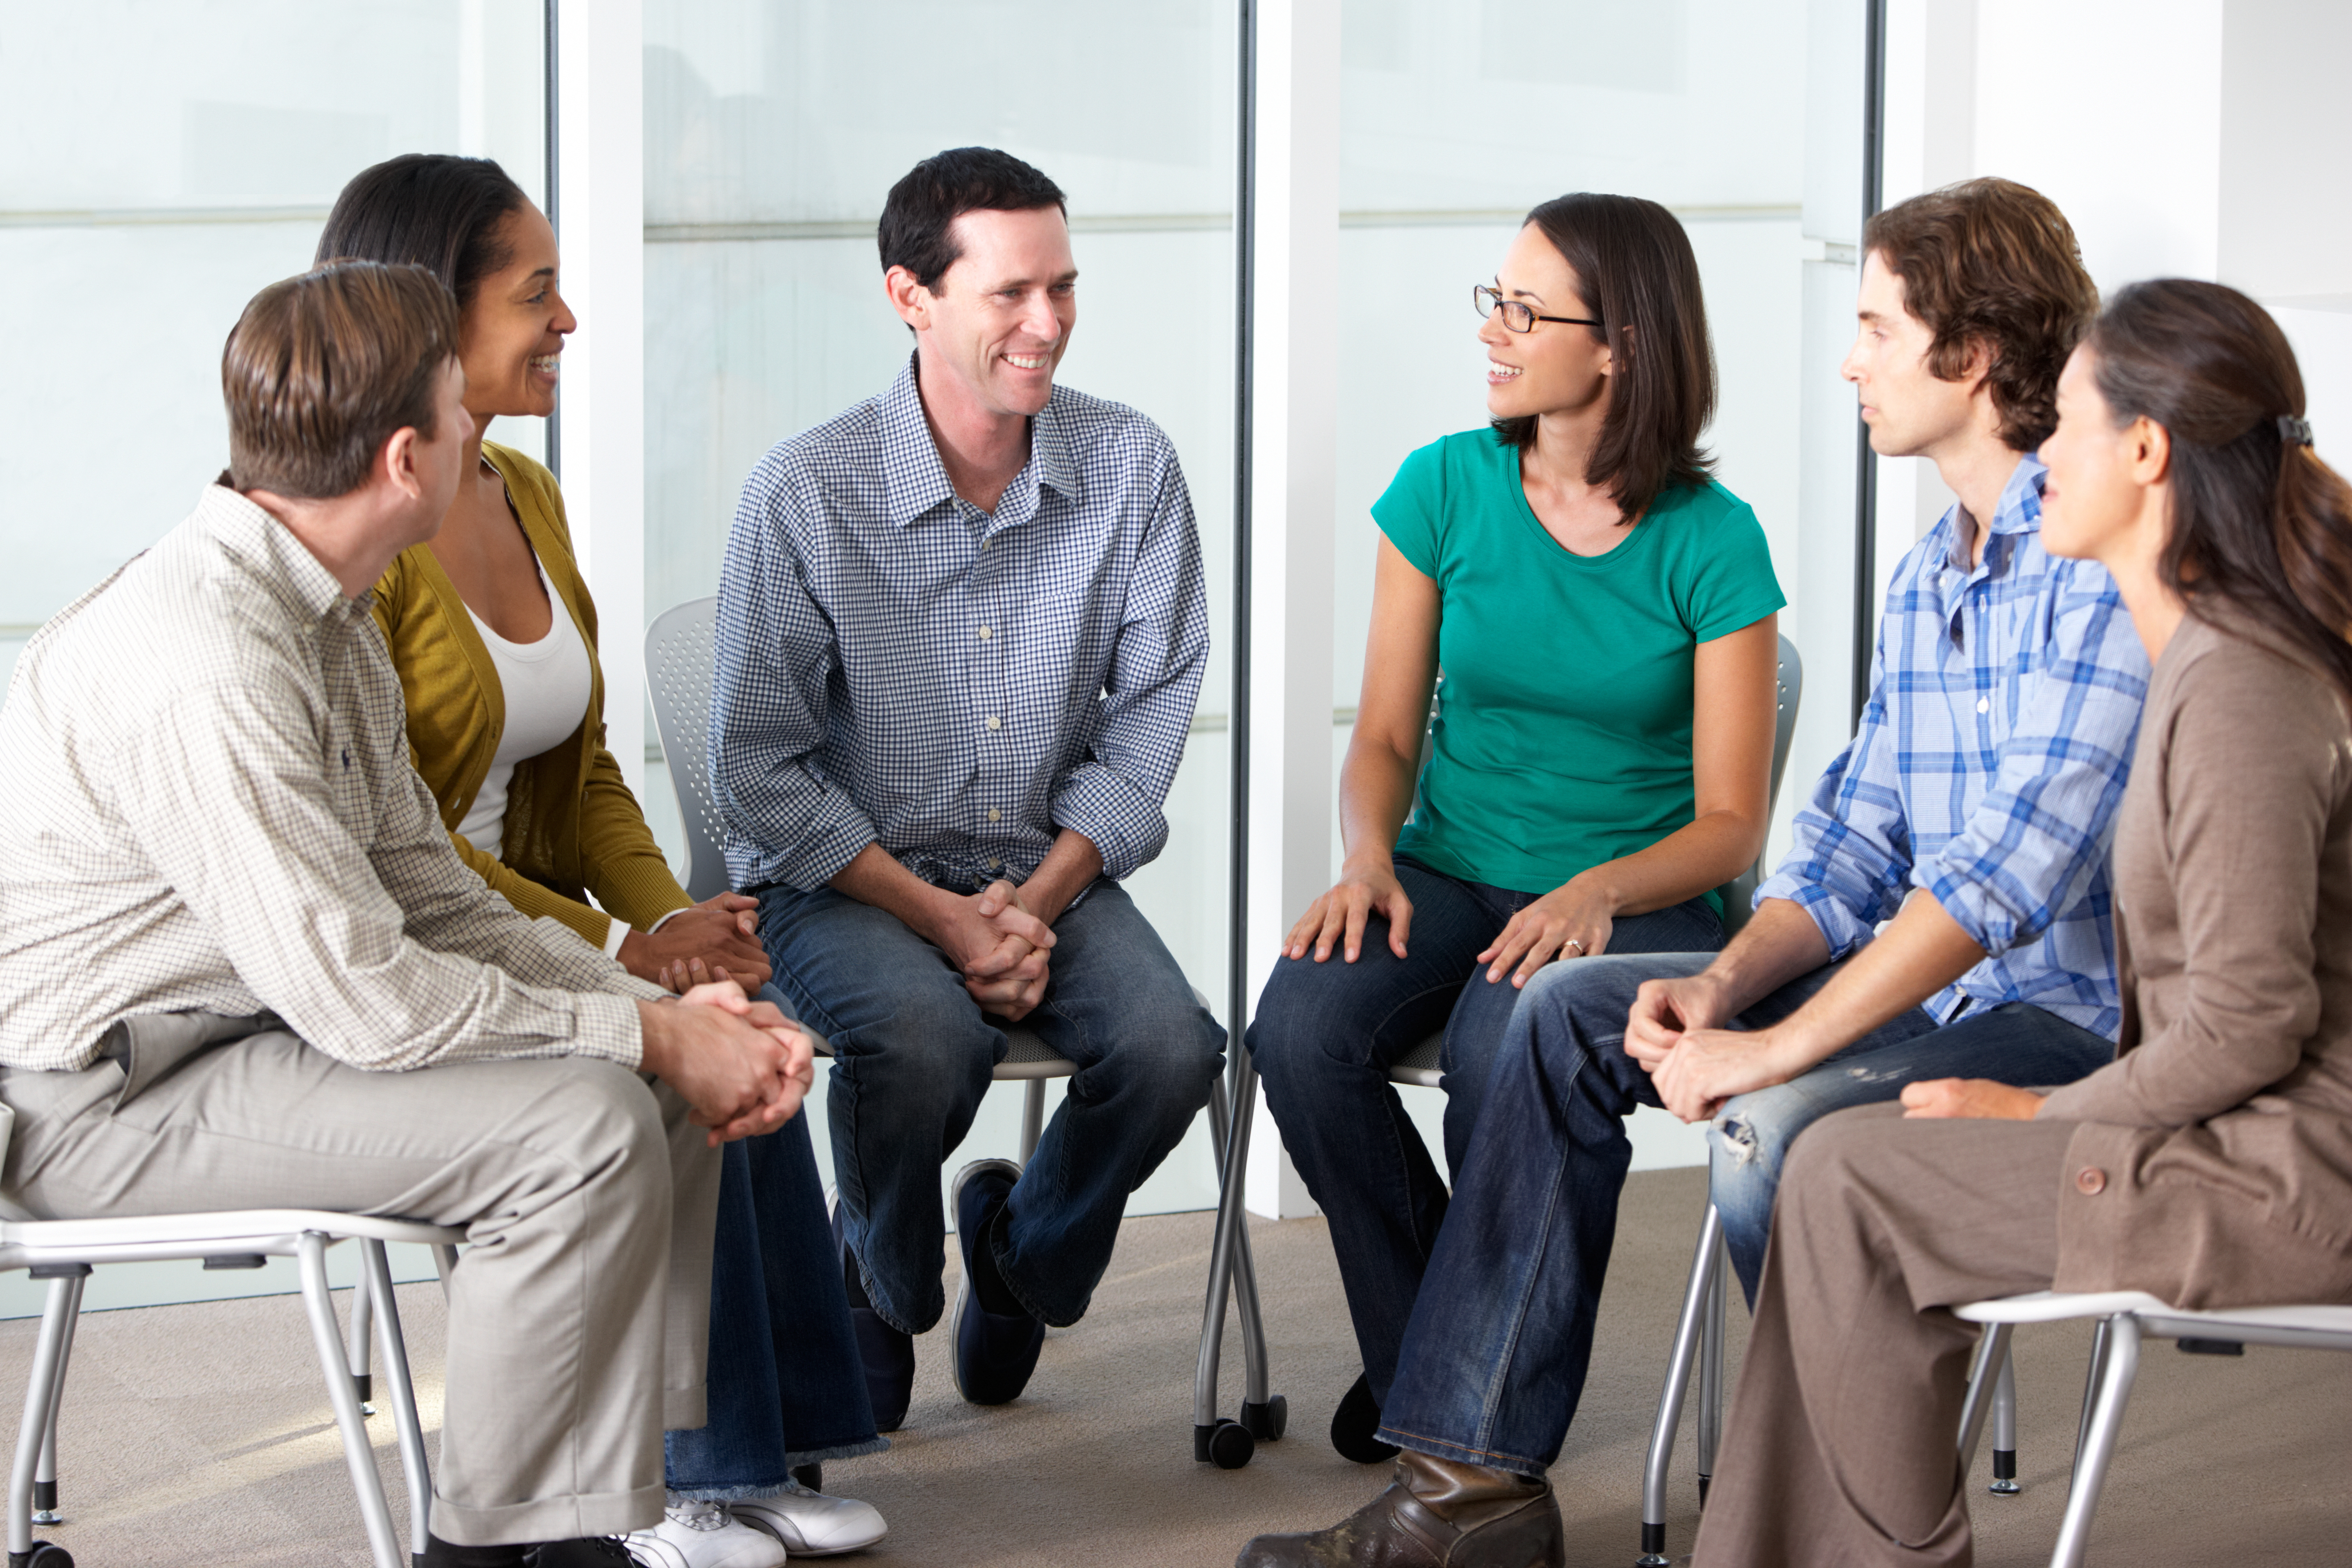 Dr. Meyer support groups for partners of people with bipolar disorder